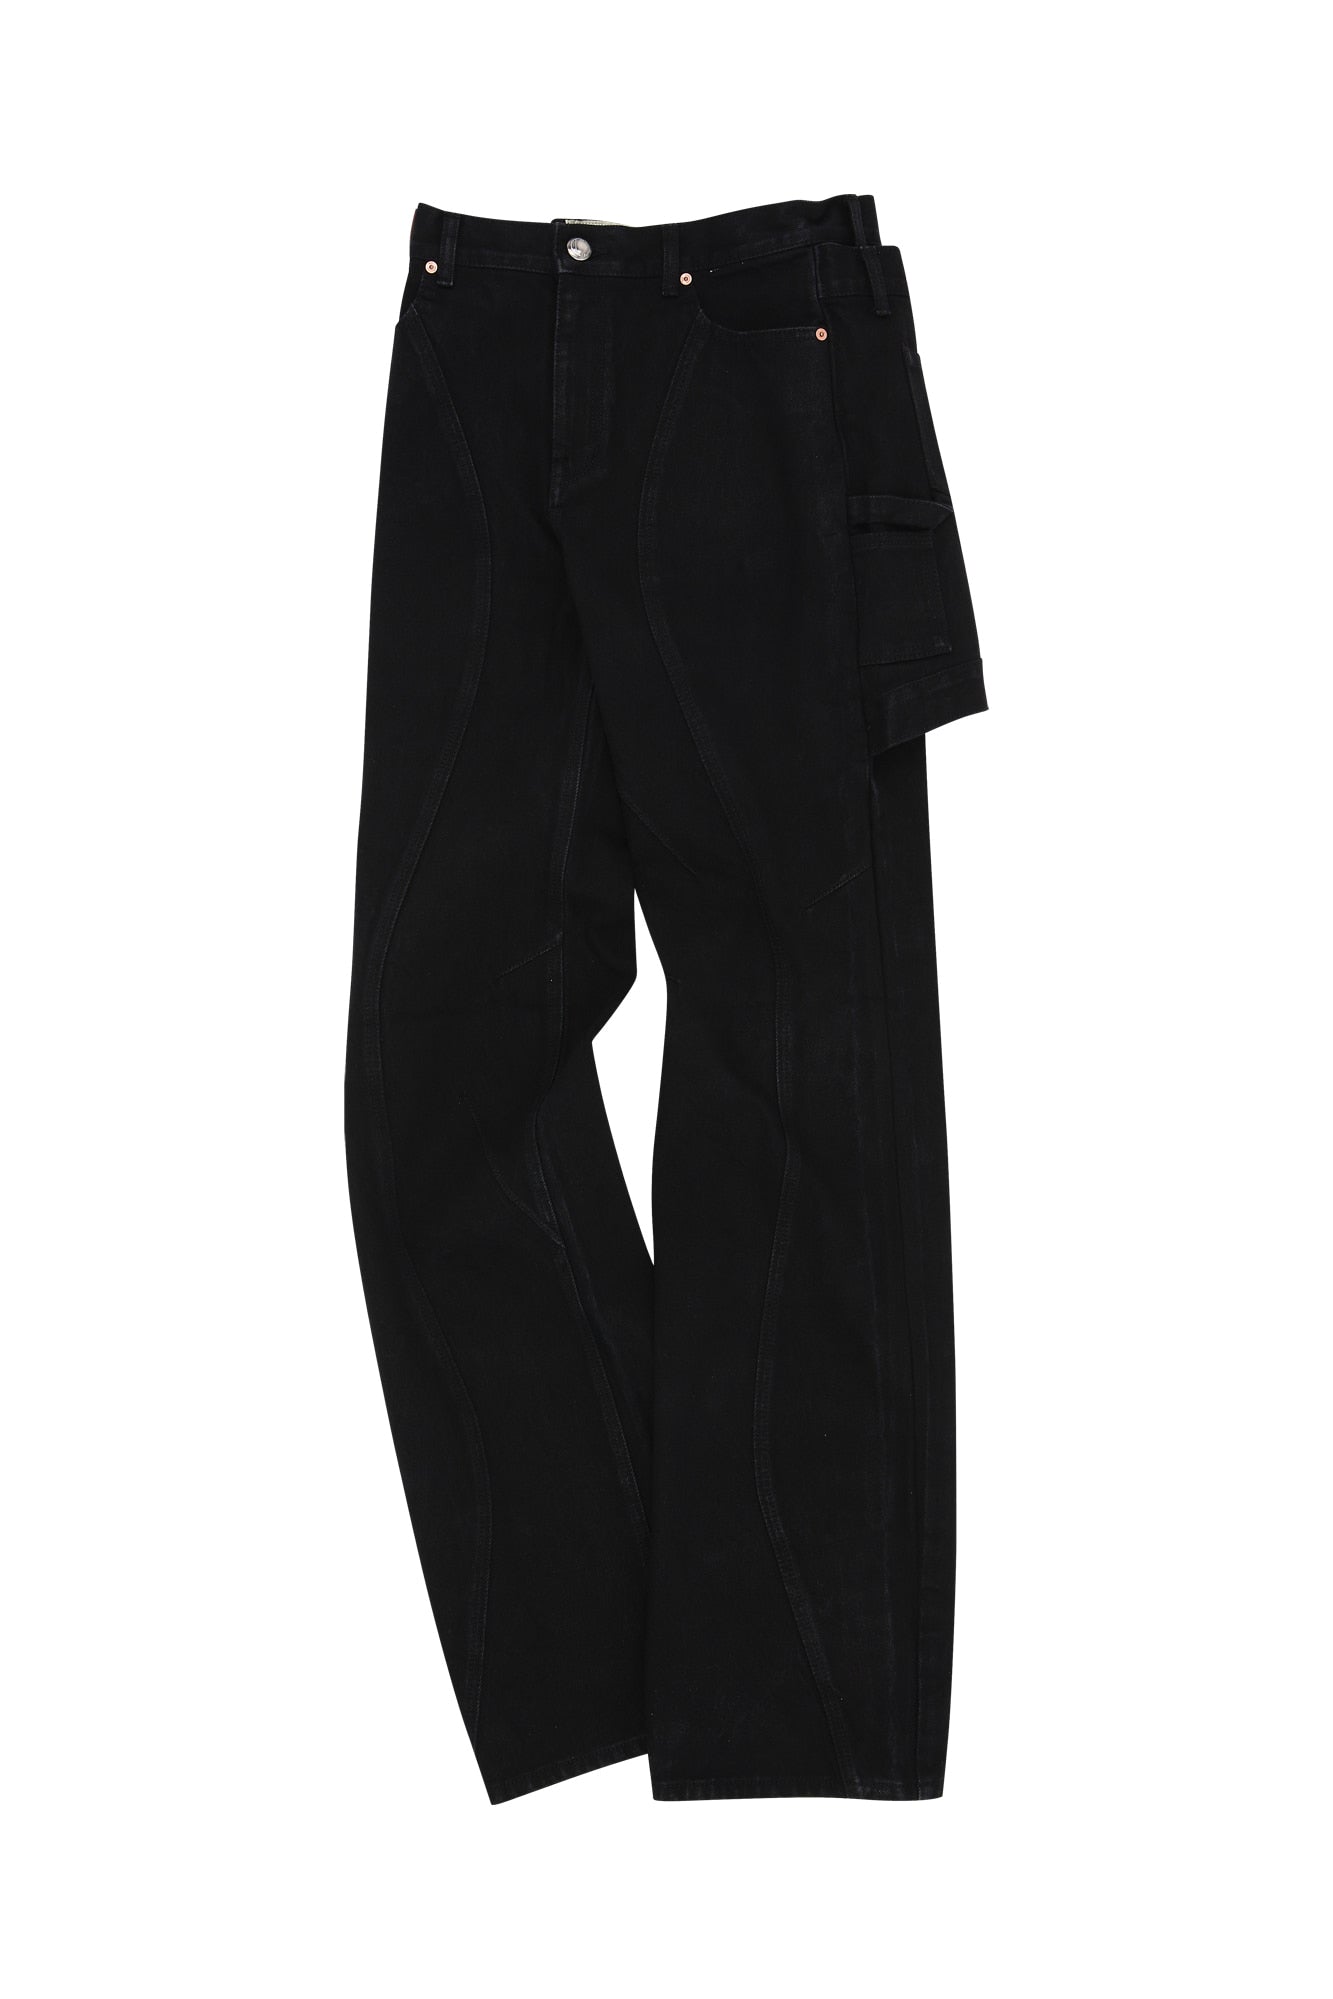 ANDERSSON BELL / Glen Overdyed Wrap Straight-Leg Jeans Black - Road Sign